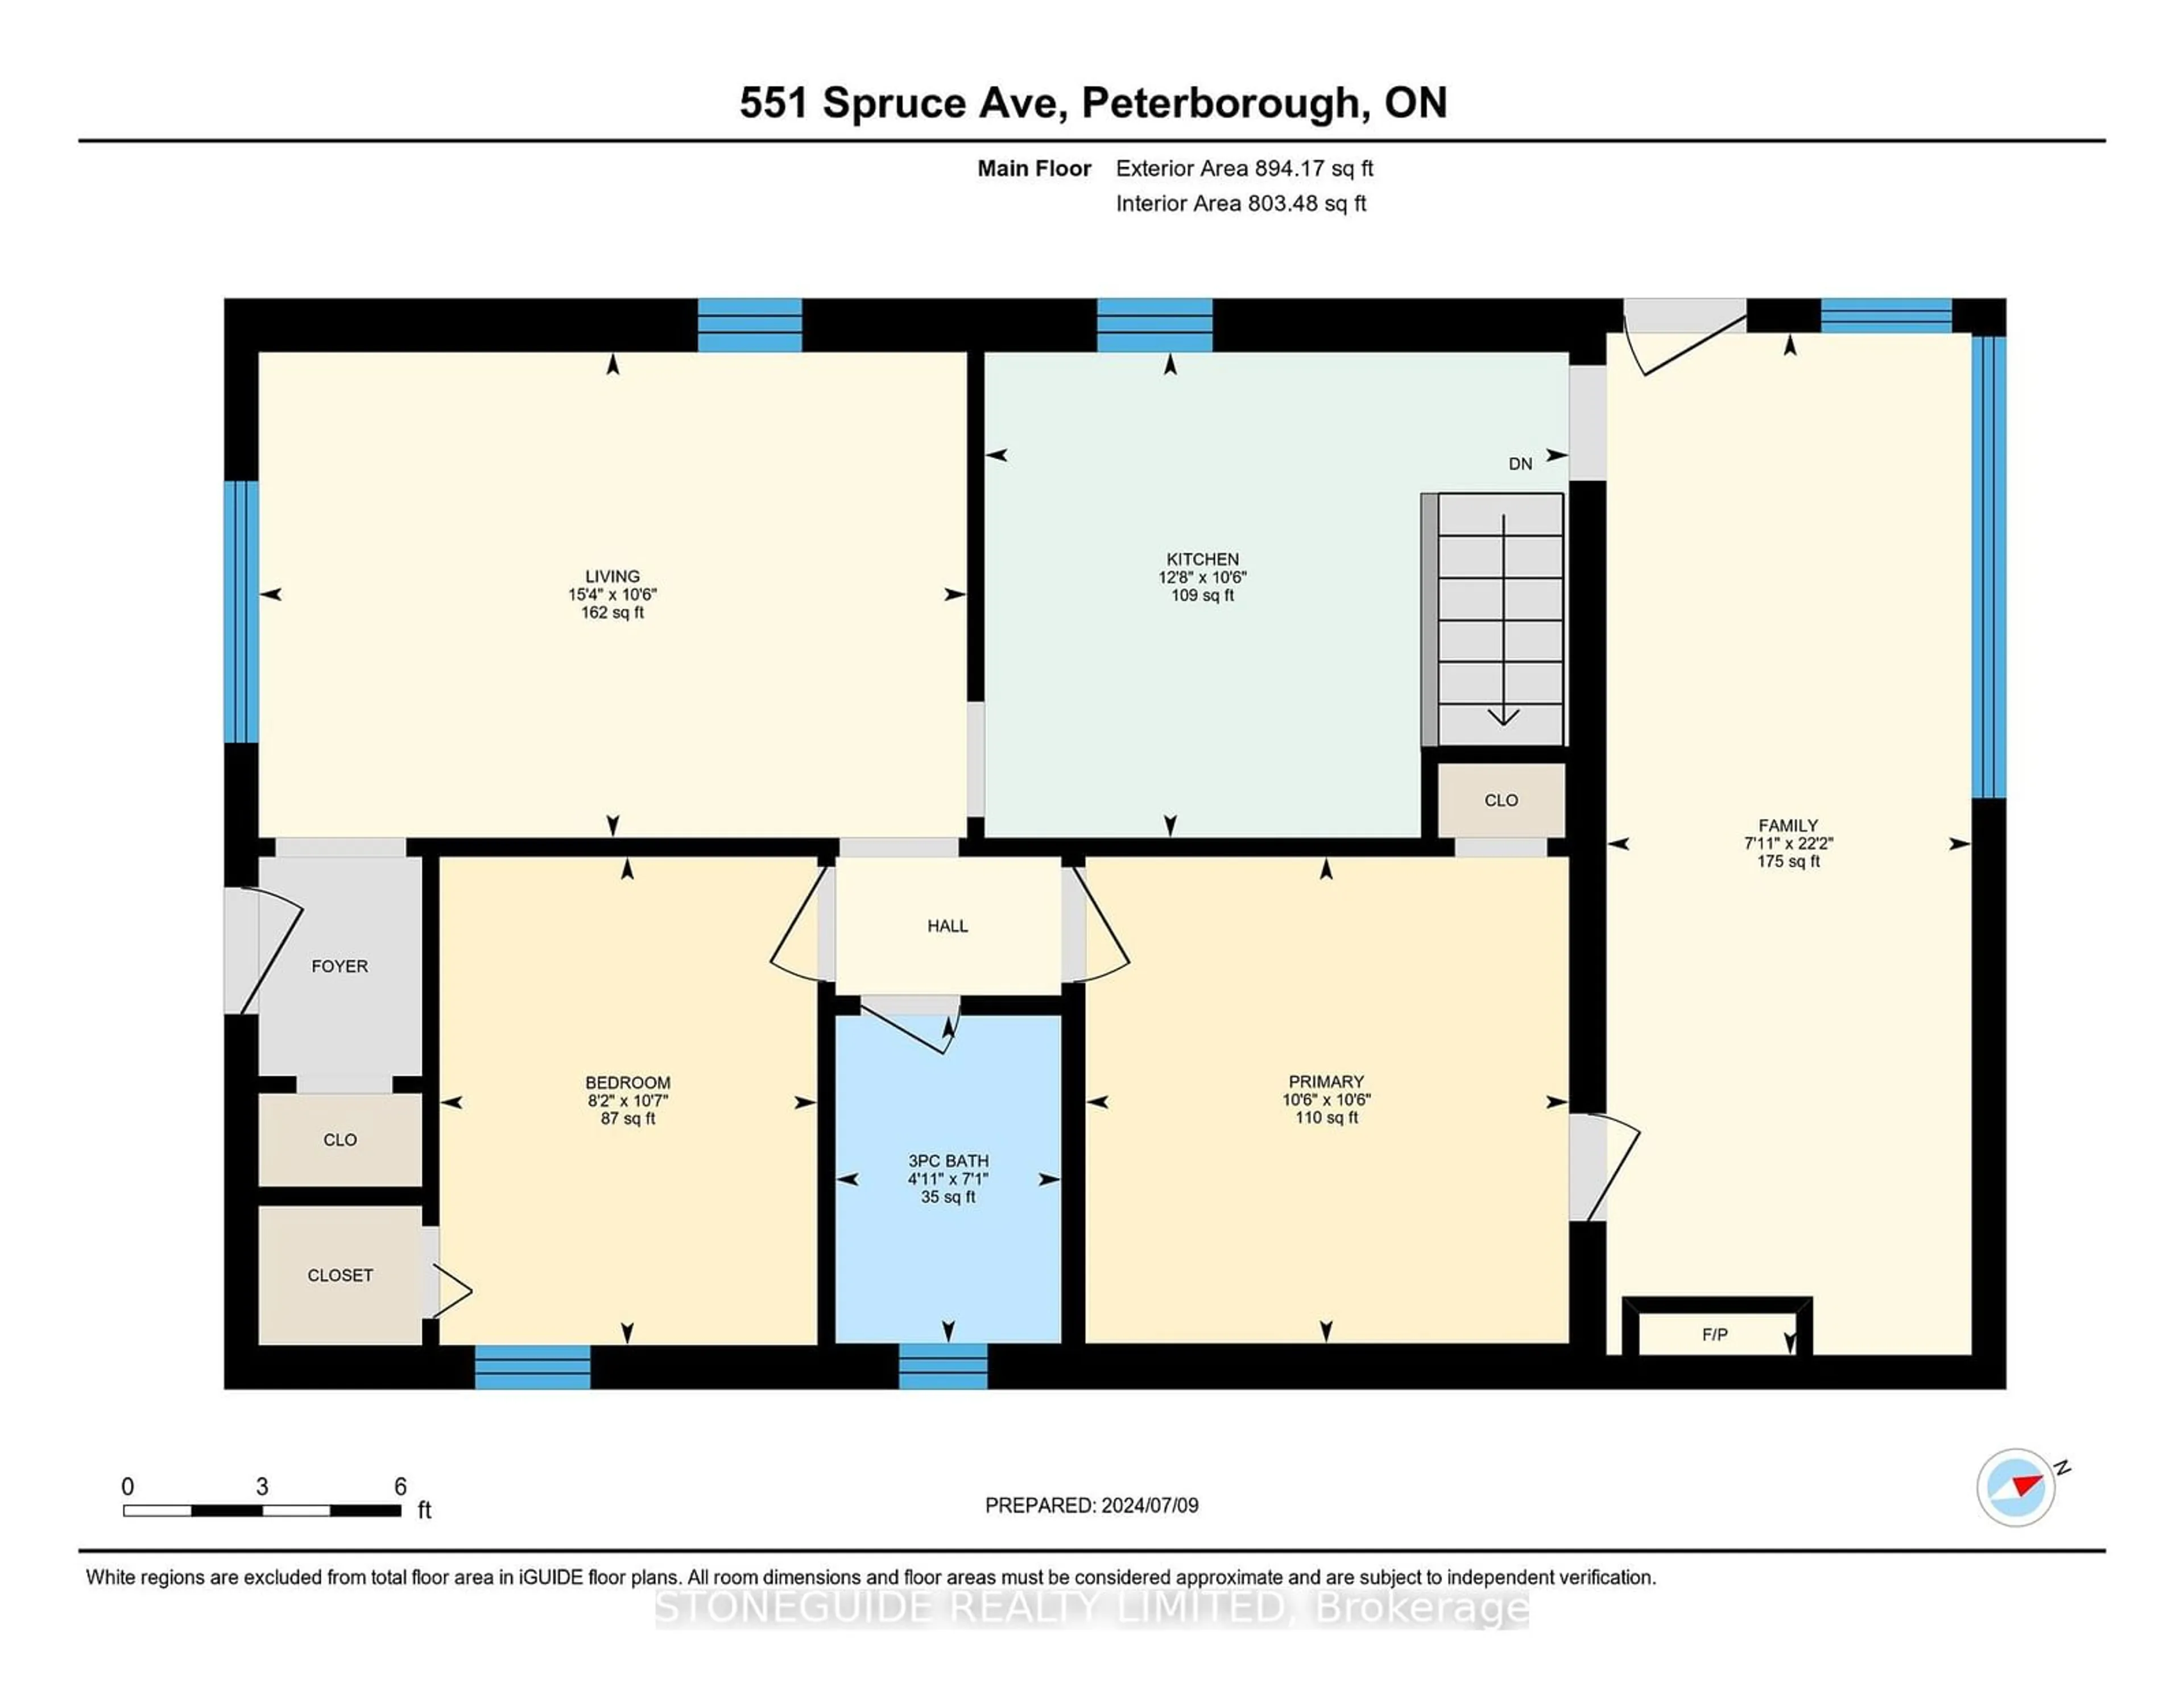 Floor plan for 551 Spruce Ave, Peterborough Ontario K9J 5A4